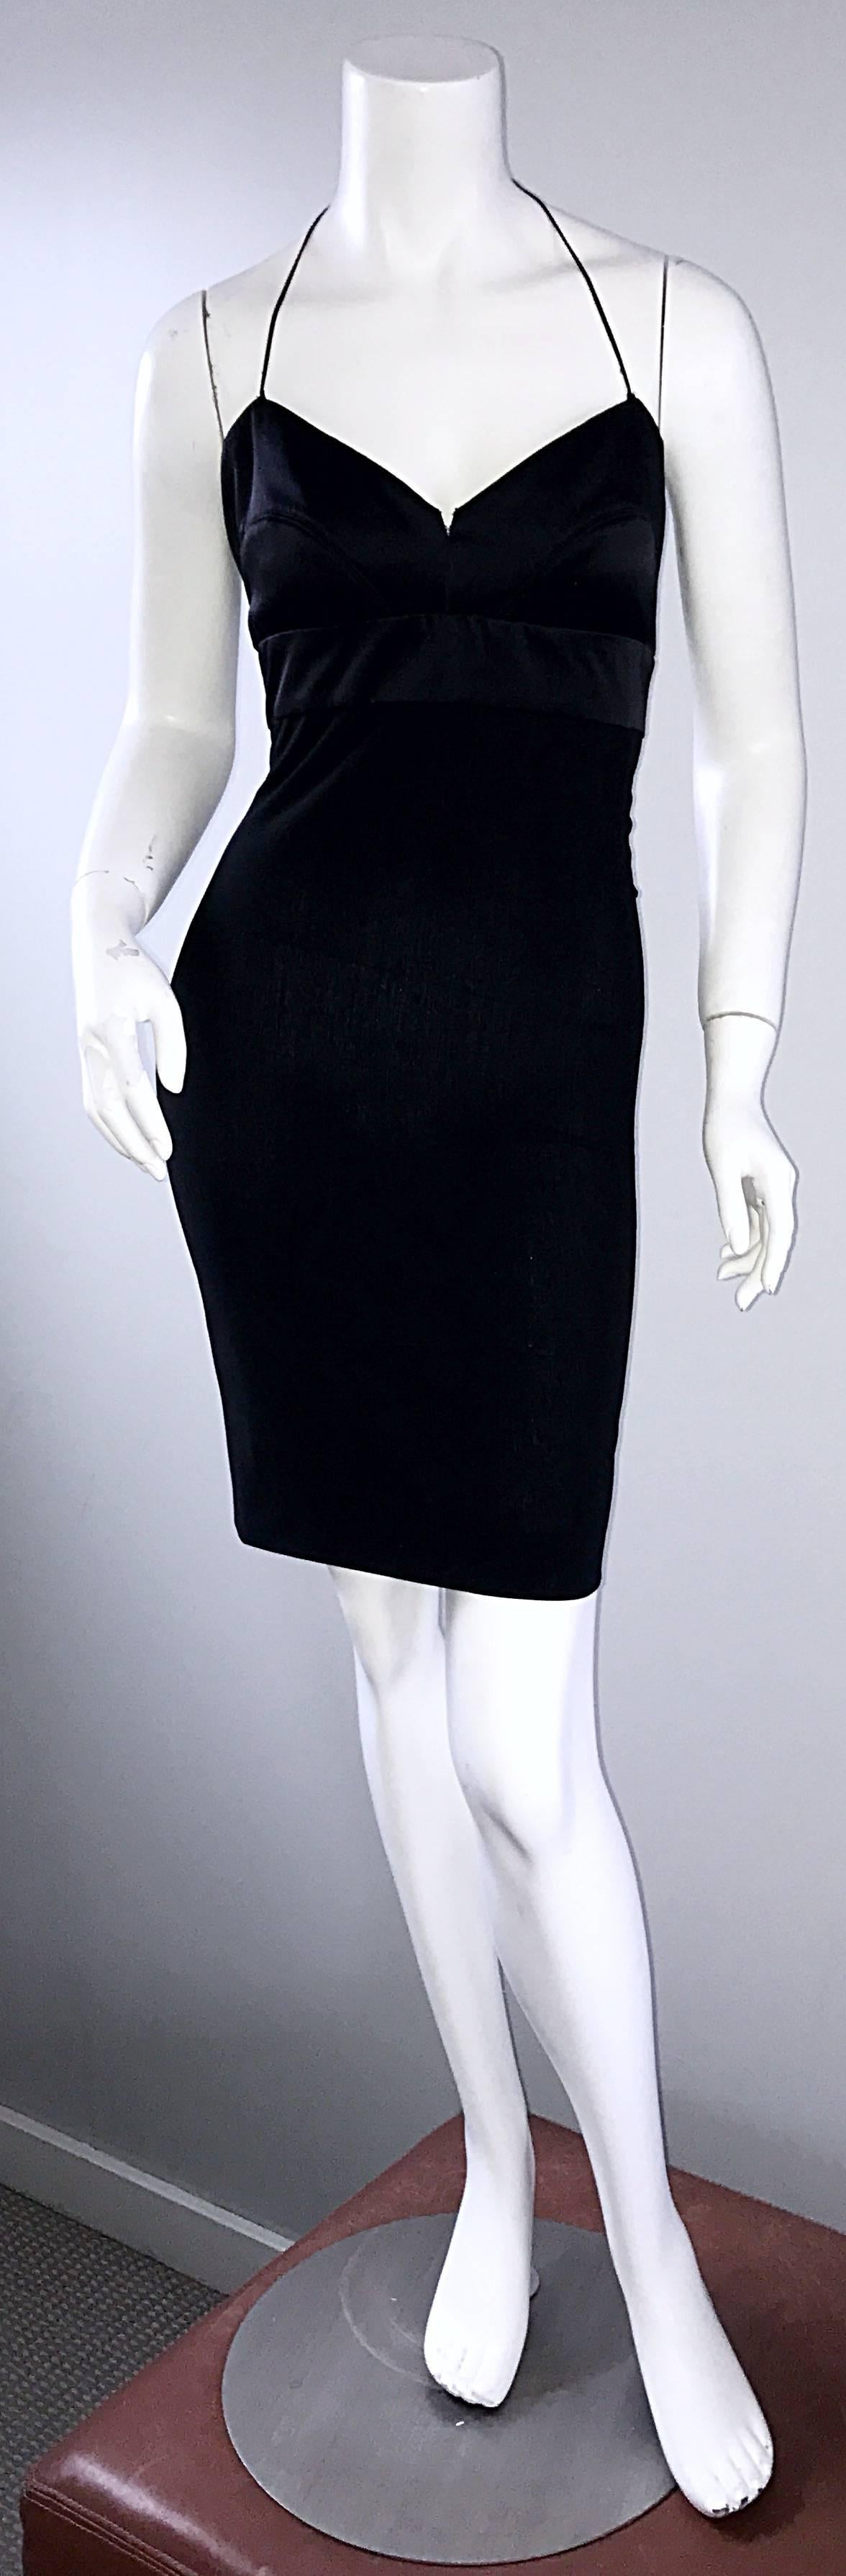 Sexy vintage NARCISCO RODRIGUEZ black bodcon cut-out back halter dress from the designer's first runway collection in 1997! Hugs the body in all the right places. Fully functional silver zipper detail up the back leaves the option of opening the